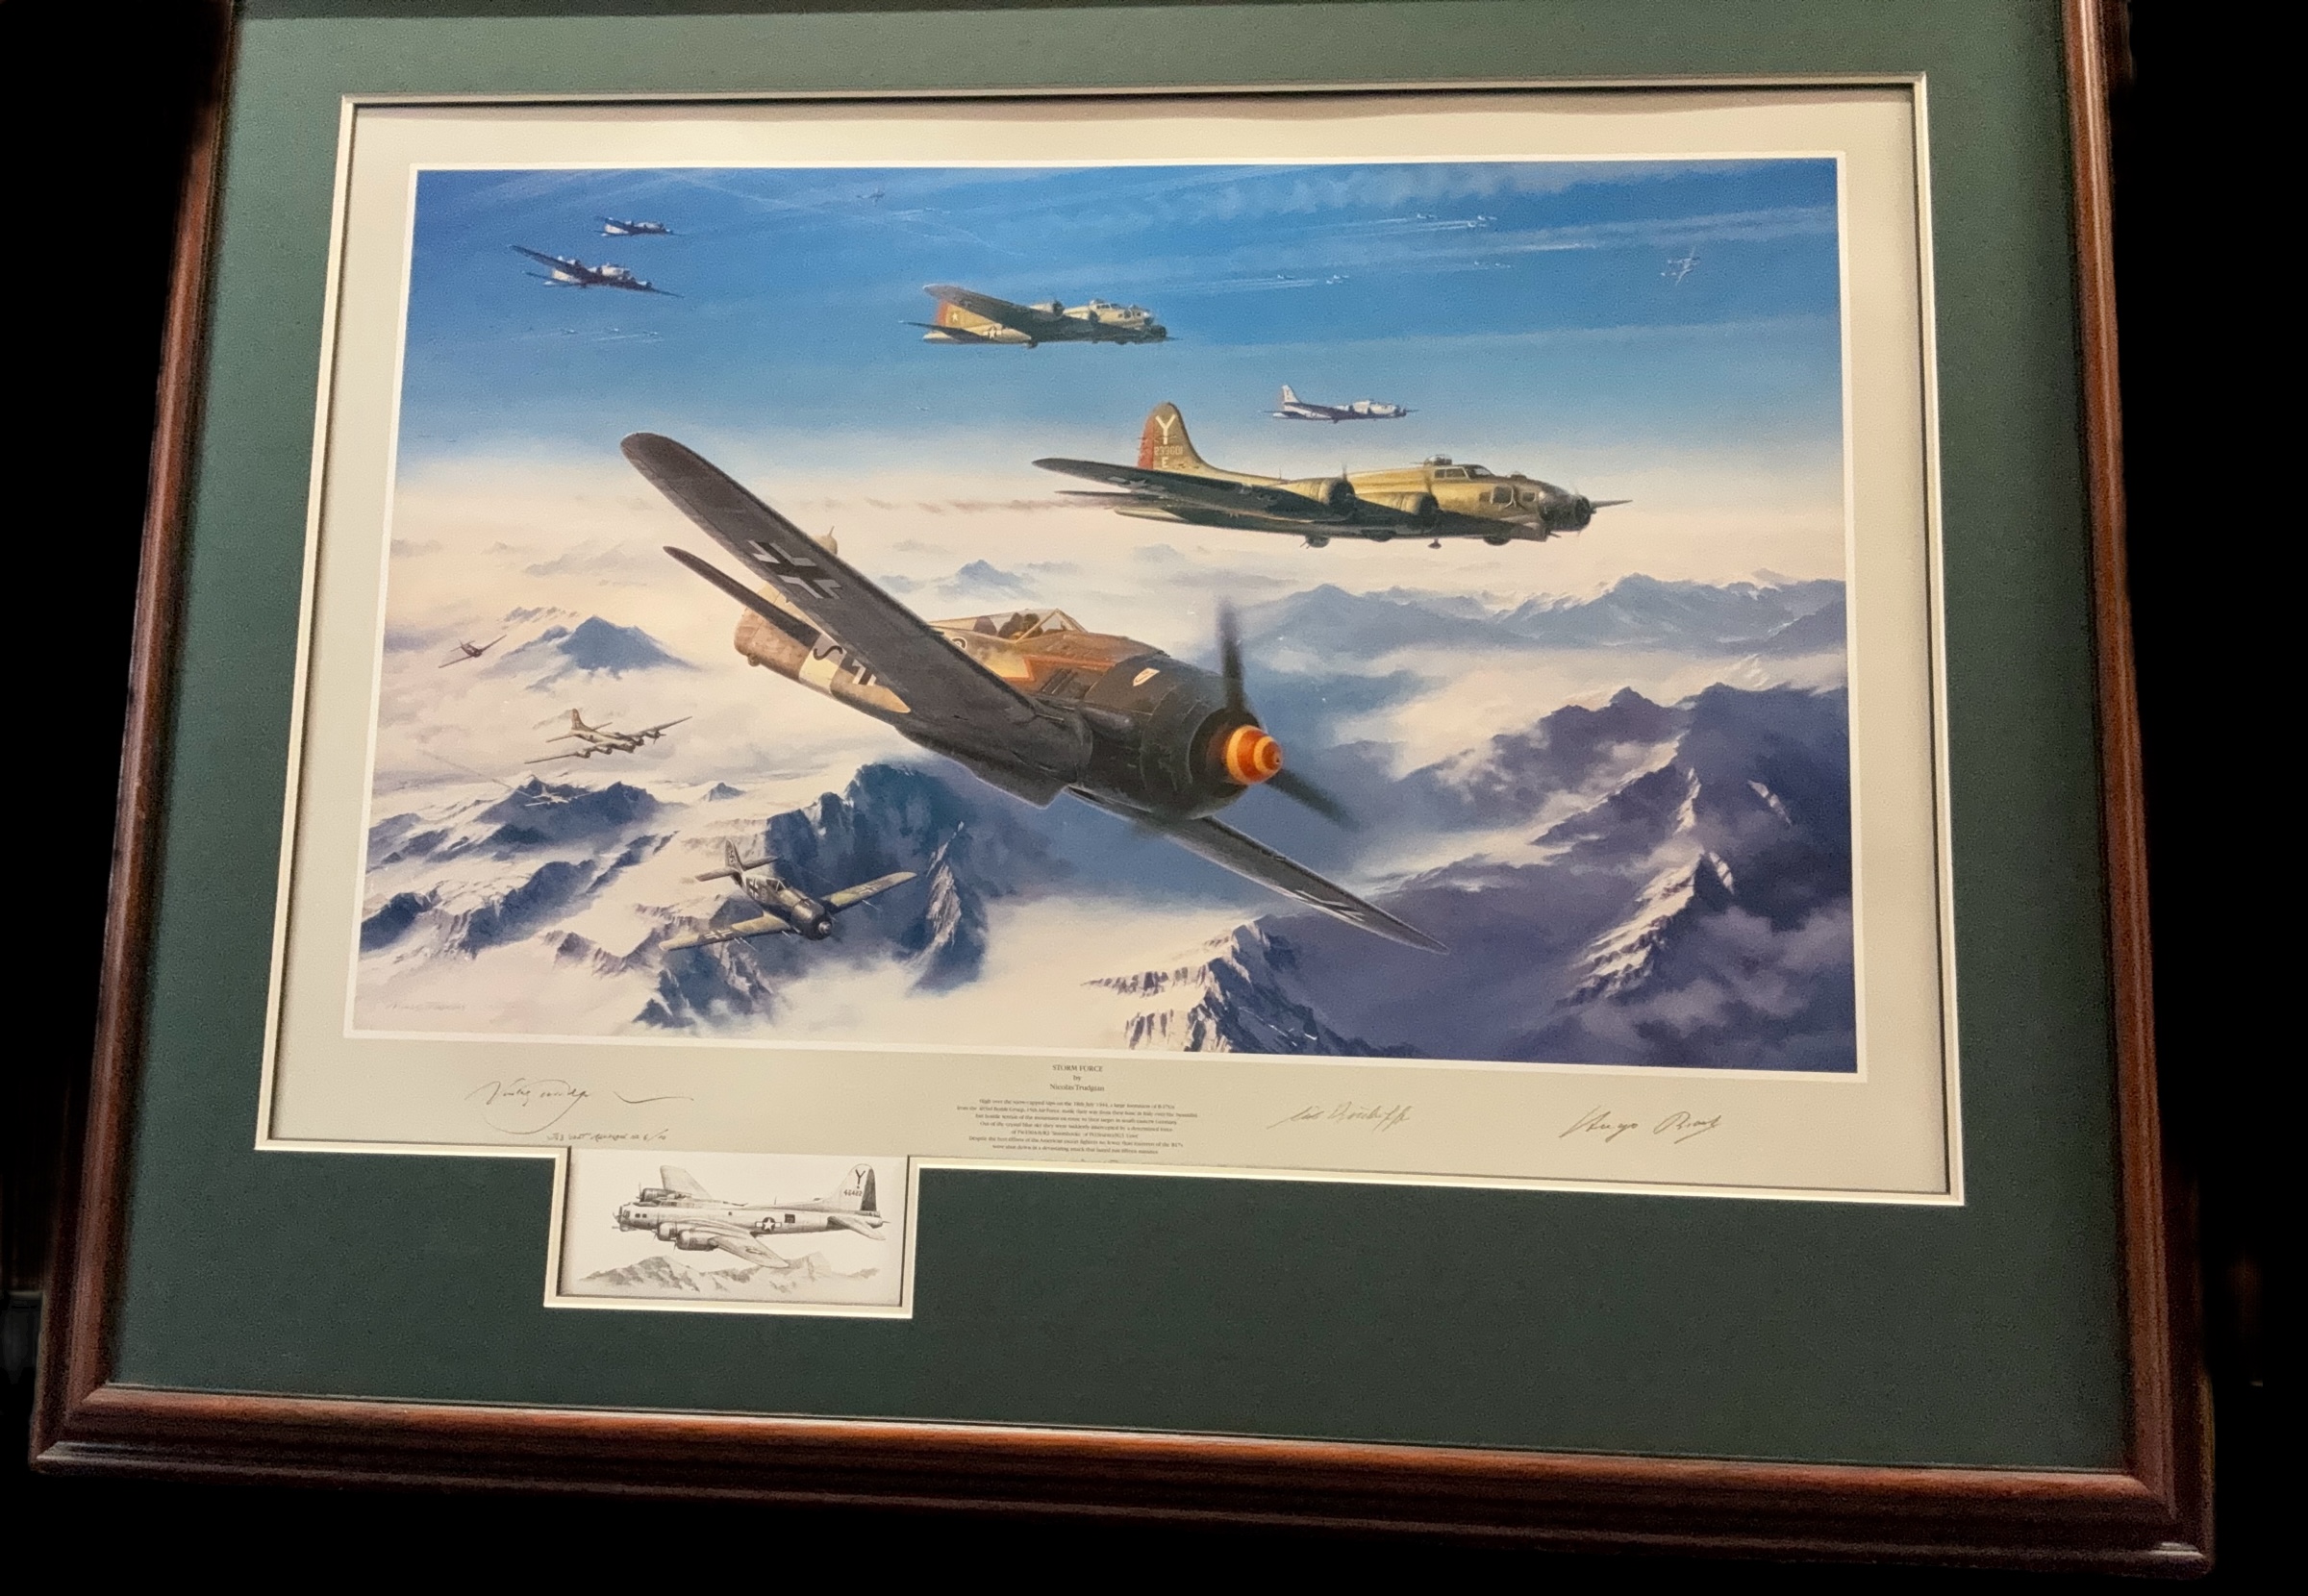 Storm Force WWII signed print 40x32 inch framed and mounted print JG3 UDET remarque No 6/10 includes